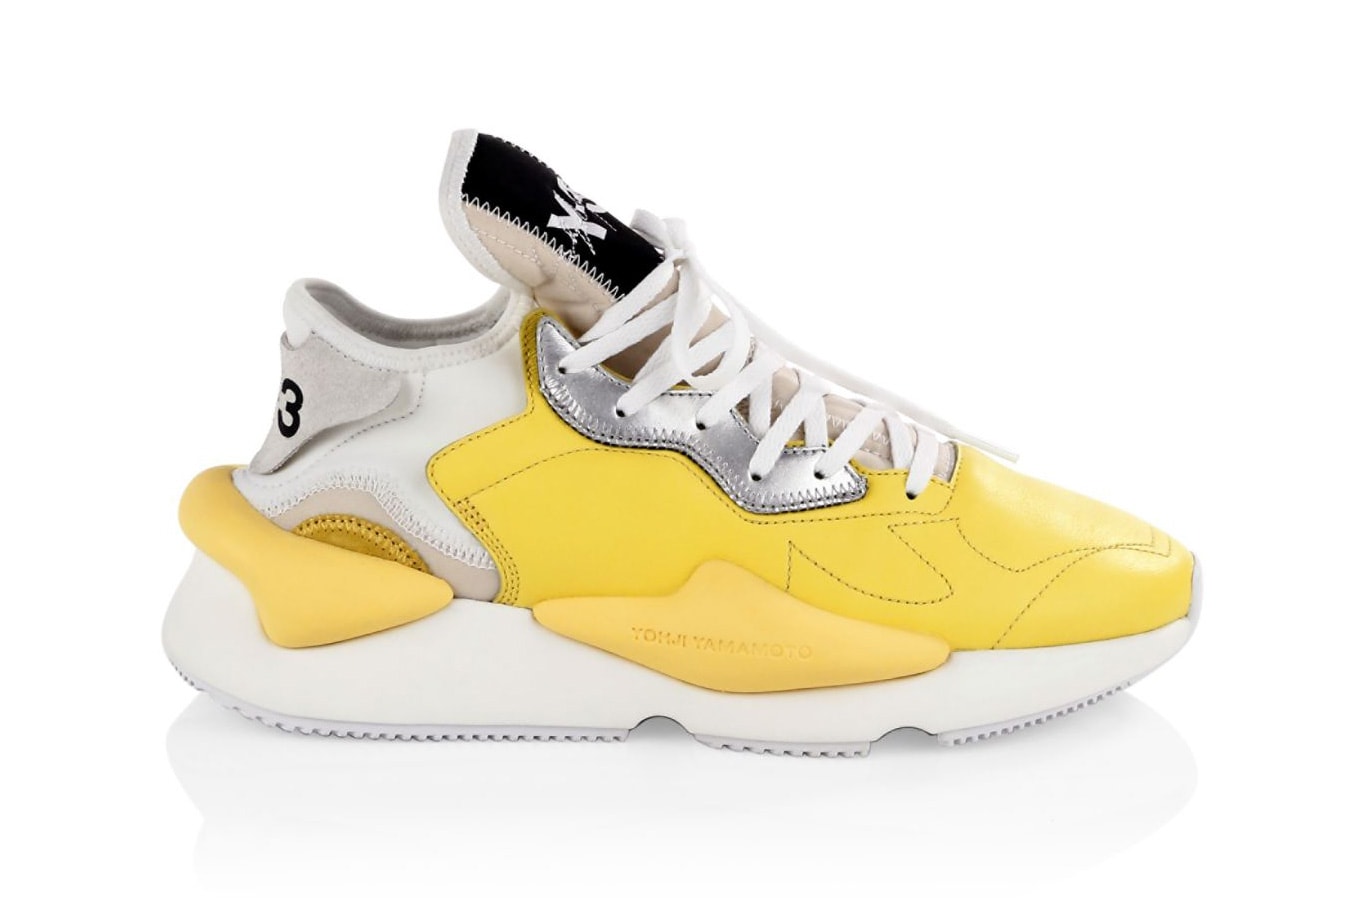 Y-3 Kaiwa Sneakers in Yellow Dad Shoes Yohji Yamamoto chunky runner white july 2018 drop release date info spring summer